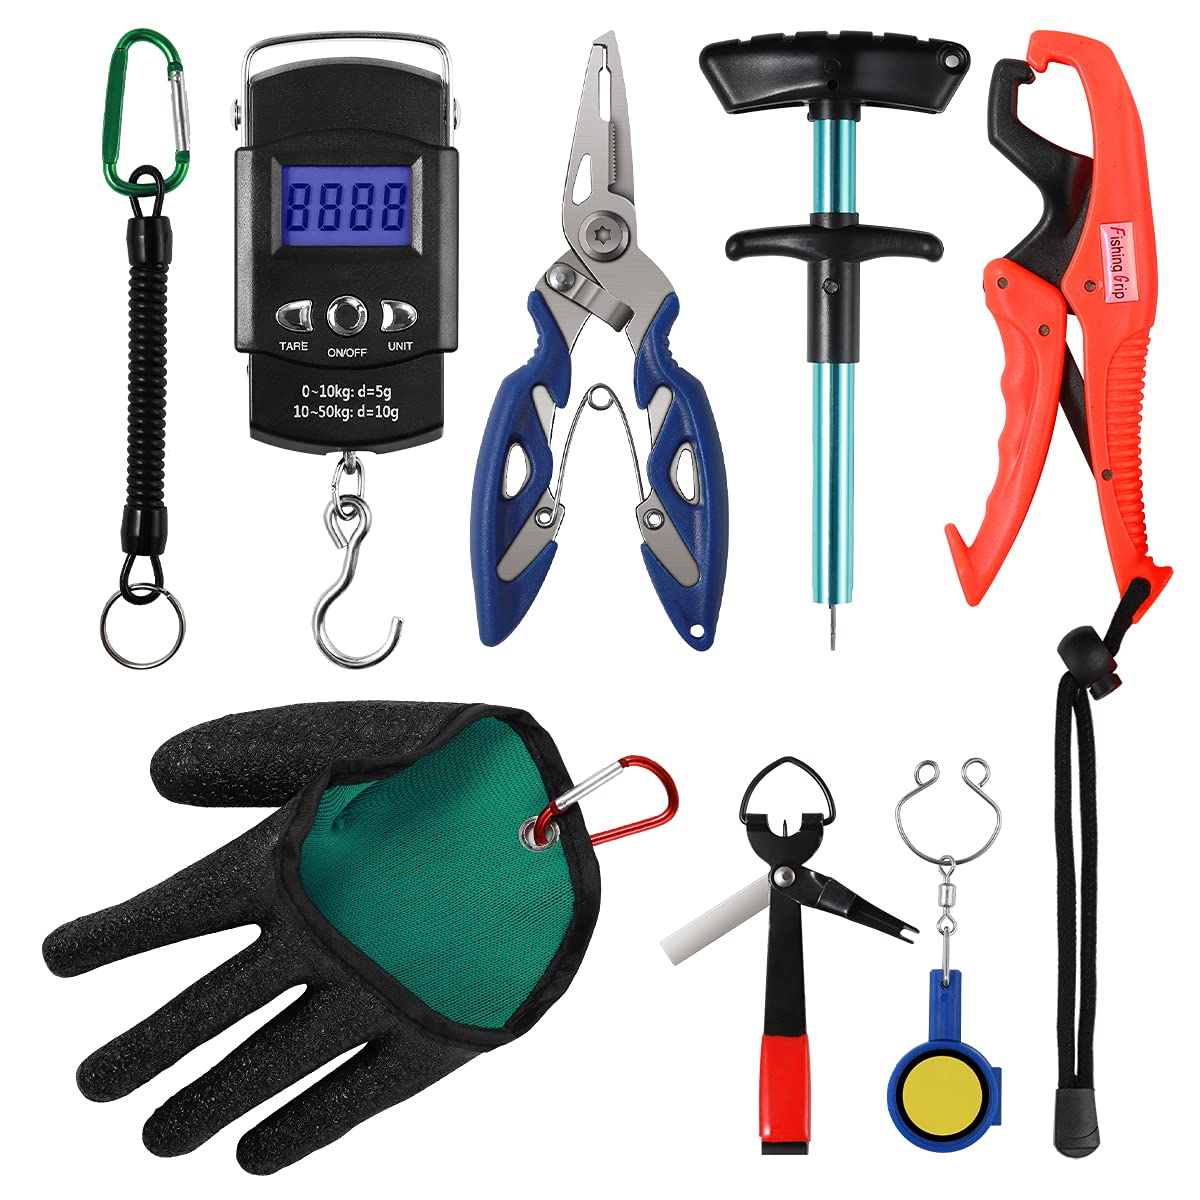 YUWU 8 Pack Fishing Tool Kit Set Includes Fish Gripper, Fishing Pliers,  Digital Fish Scale, Left Hand Glove, Quick Knot Tying and Hook Remover  Tool